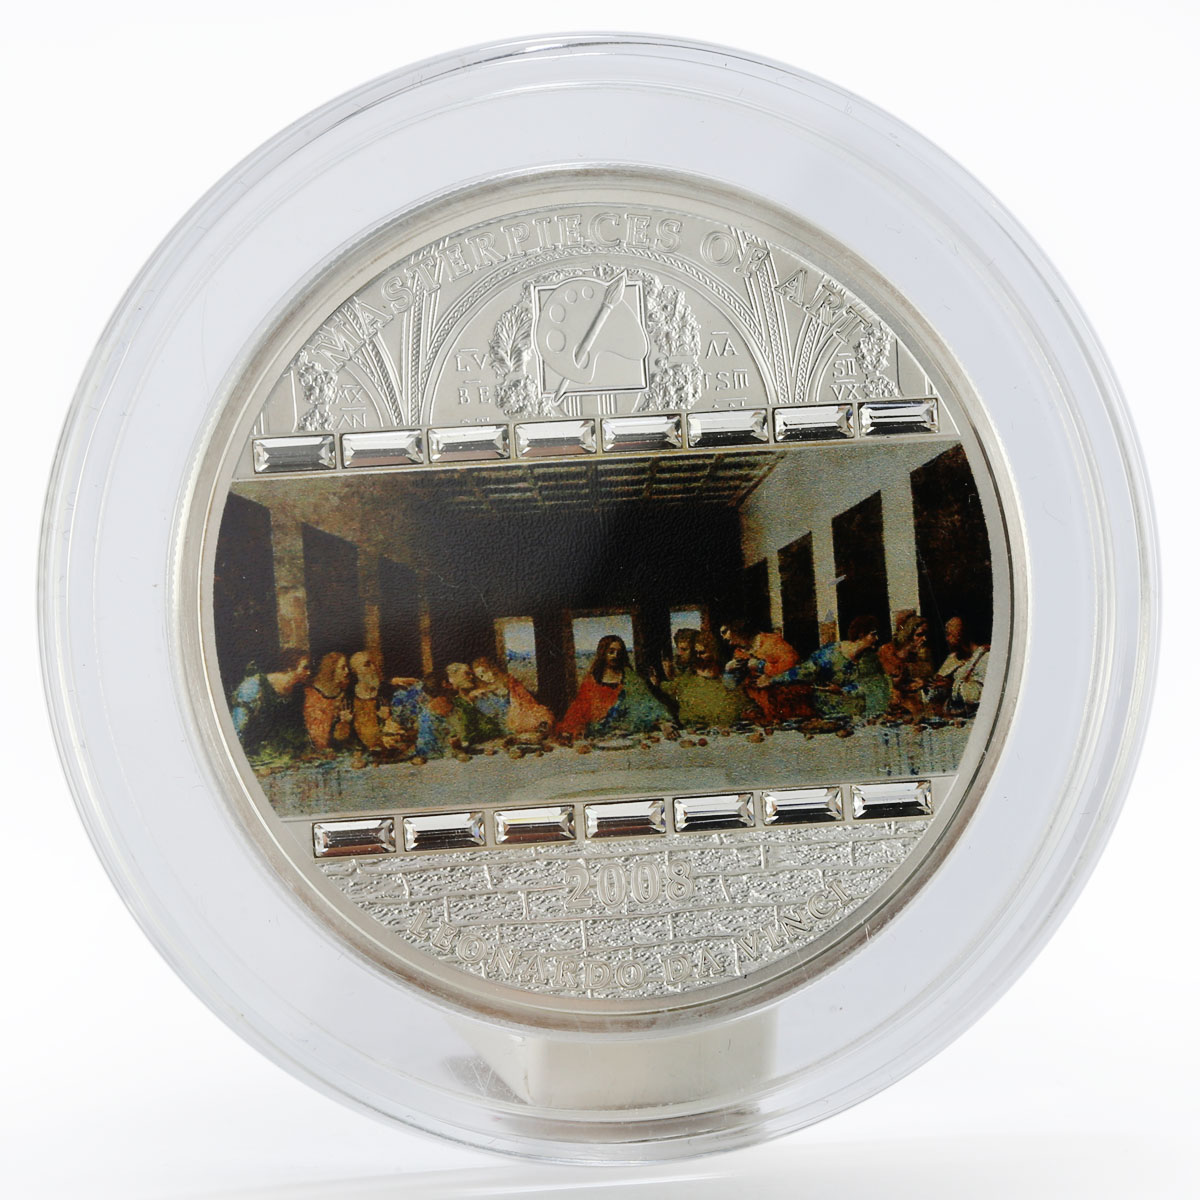 Cook Islands 20 dollars The Last Supper art crystals colored silver coin 2008